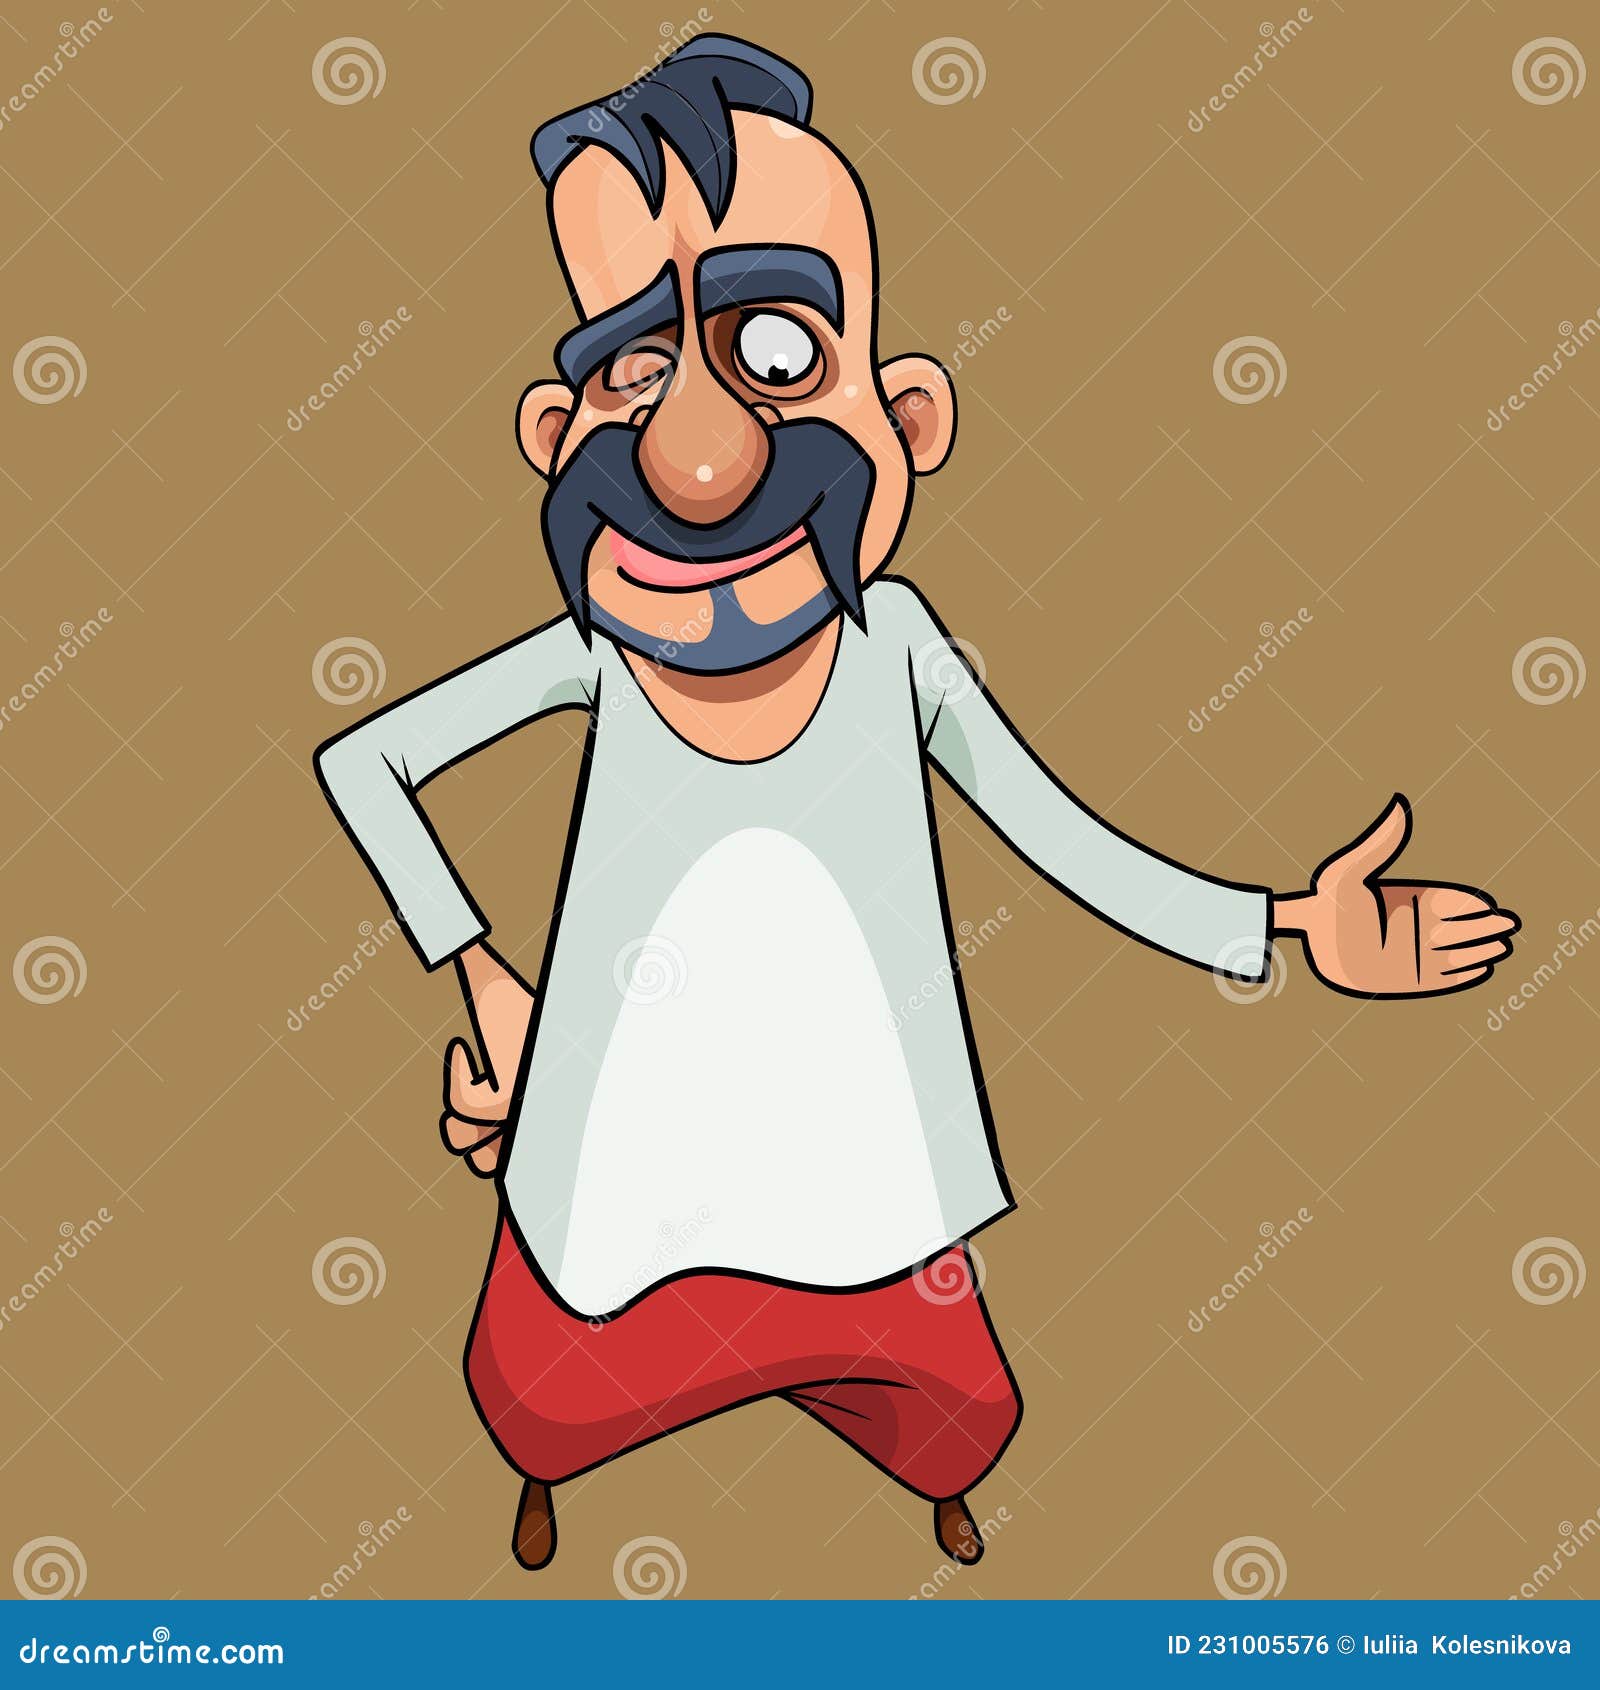 Cartoon Man in Red Trousers with a Long Mustache and a Forelock on His ...